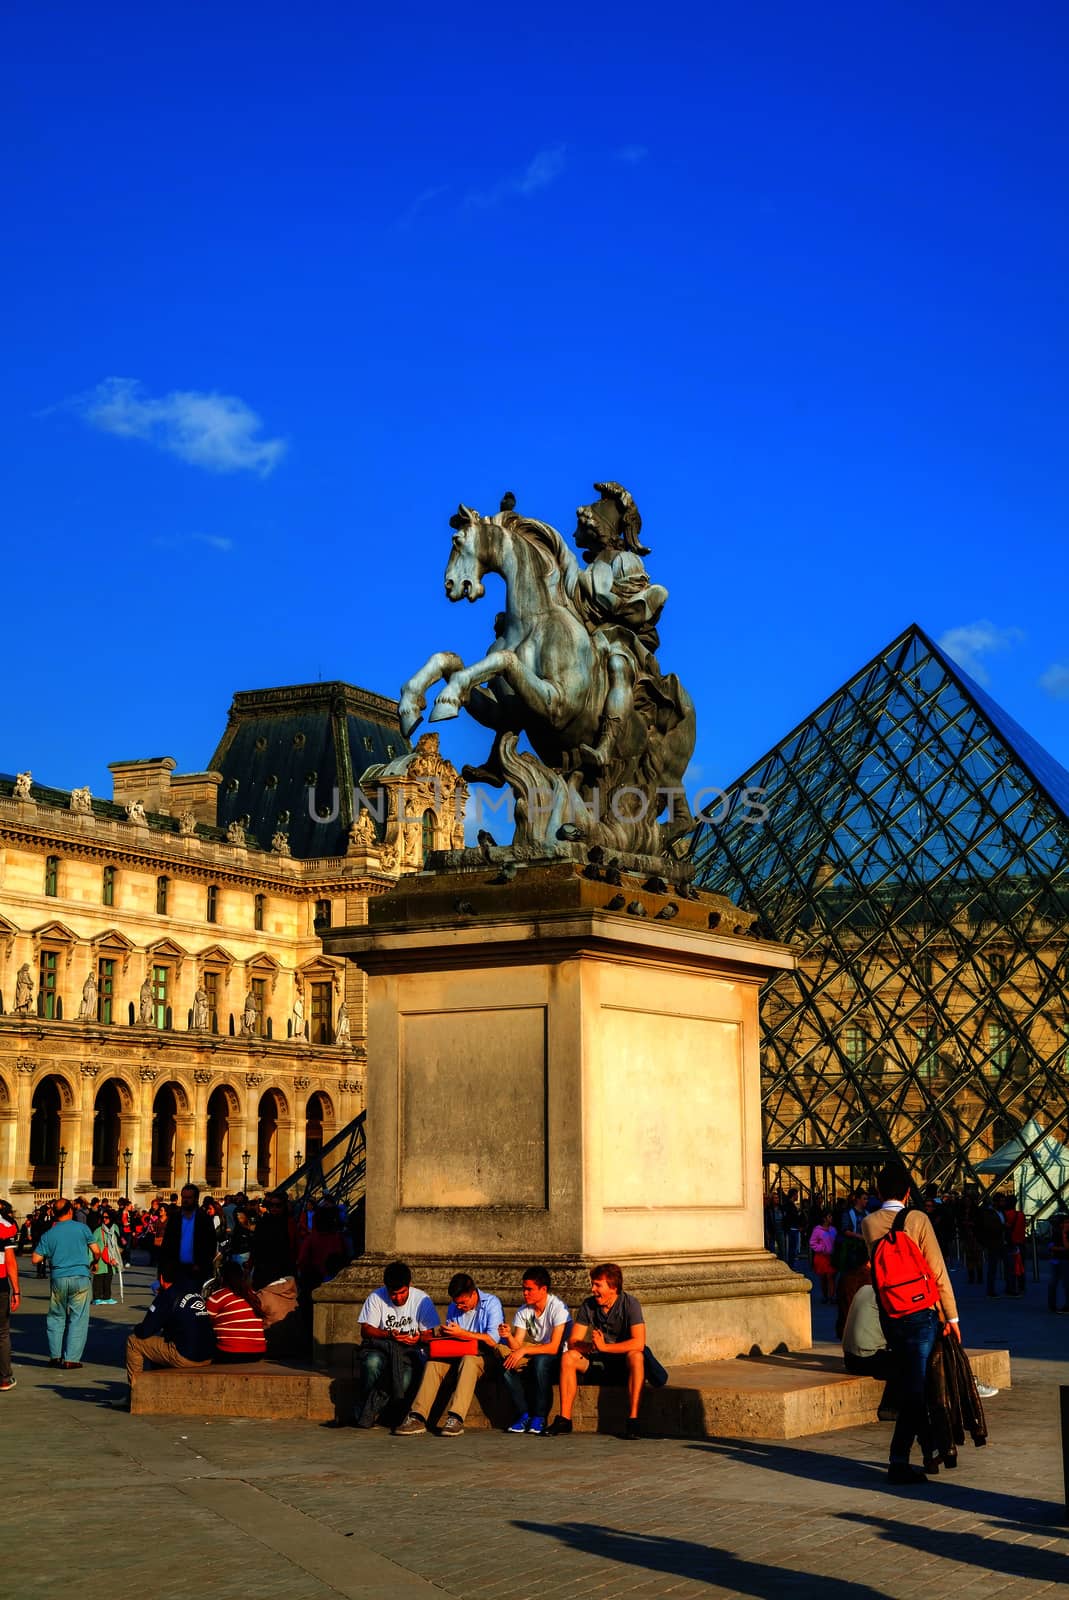 PARIS - OCTOBER 9: Louis XIV statue at the Louvre museum on October 9, 2014 in Paris, France. It's one of the world's largest museums and a historic monument and a central landmark of Paris.